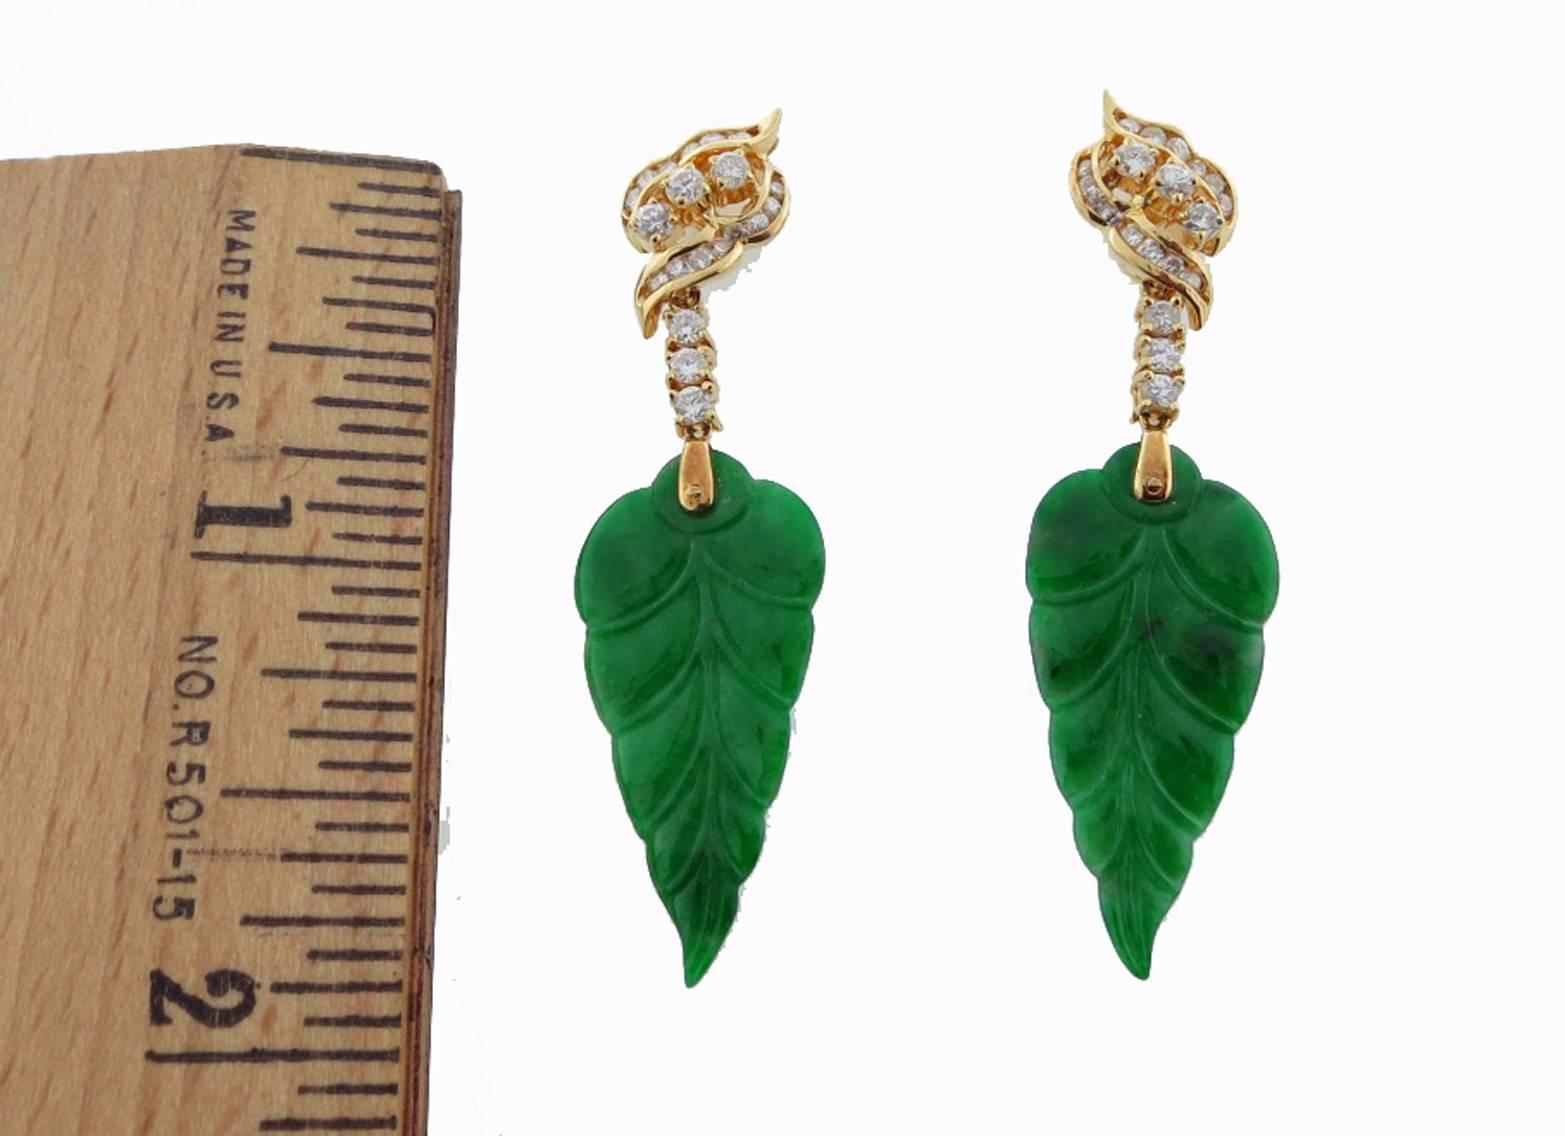 Old carved natural jade leaf earrings with contemporary diamond tops. Each earring  measures approx 2 inches in length mounted in 18kt. yellow gold . Each leaf is carved on both sides and topped with 20 round brilliant cut diamonds in articulated